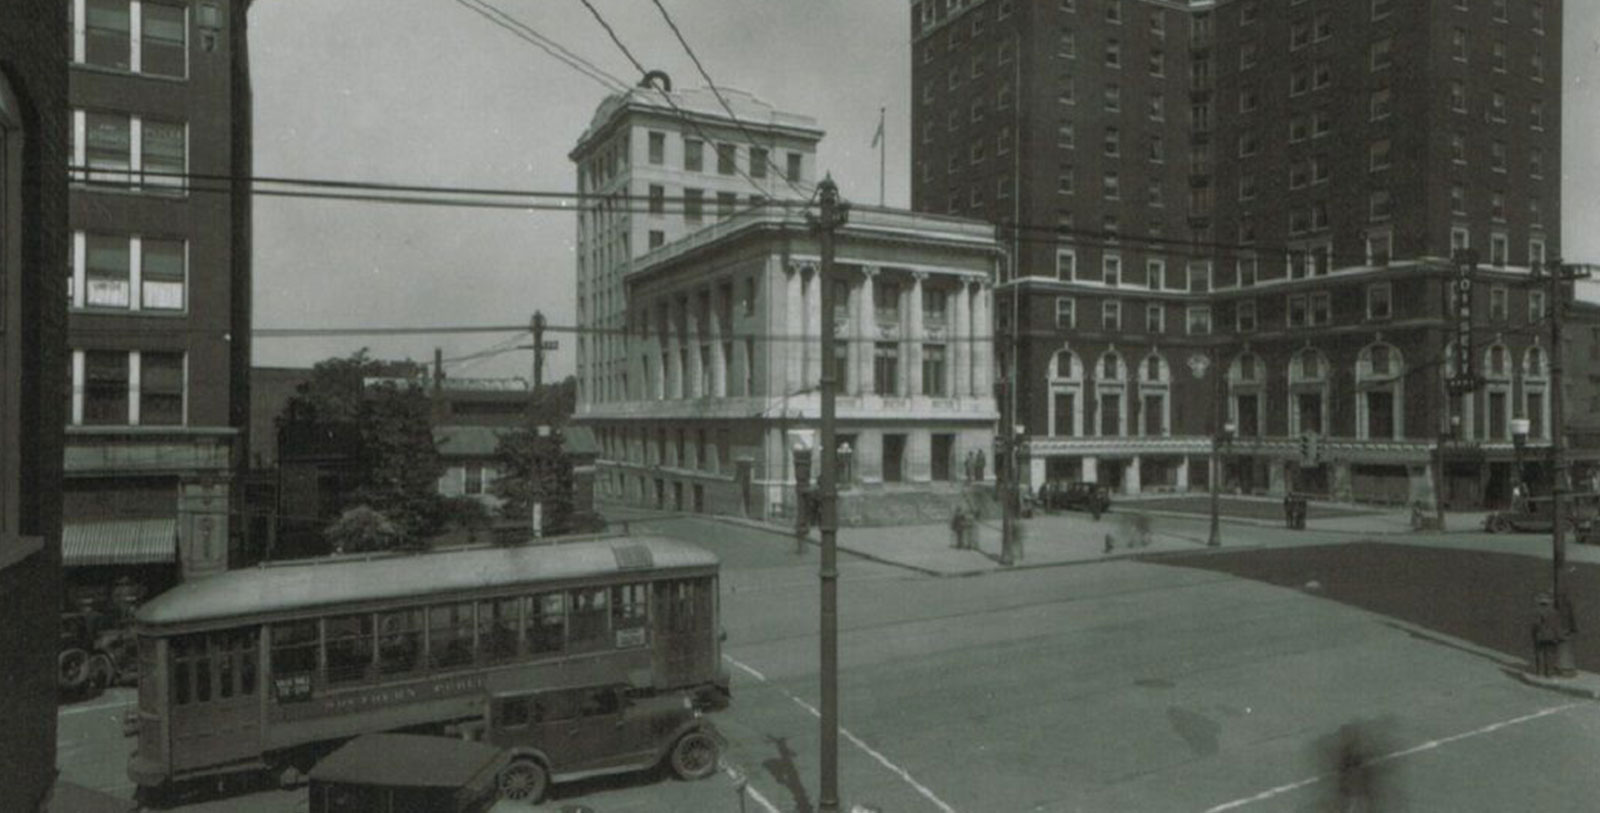 Historical Image of Exterior and Courthouse, The Westin Poinsett, 1925, Member of Historic Hotels of America, in Greeneville, South Carolina